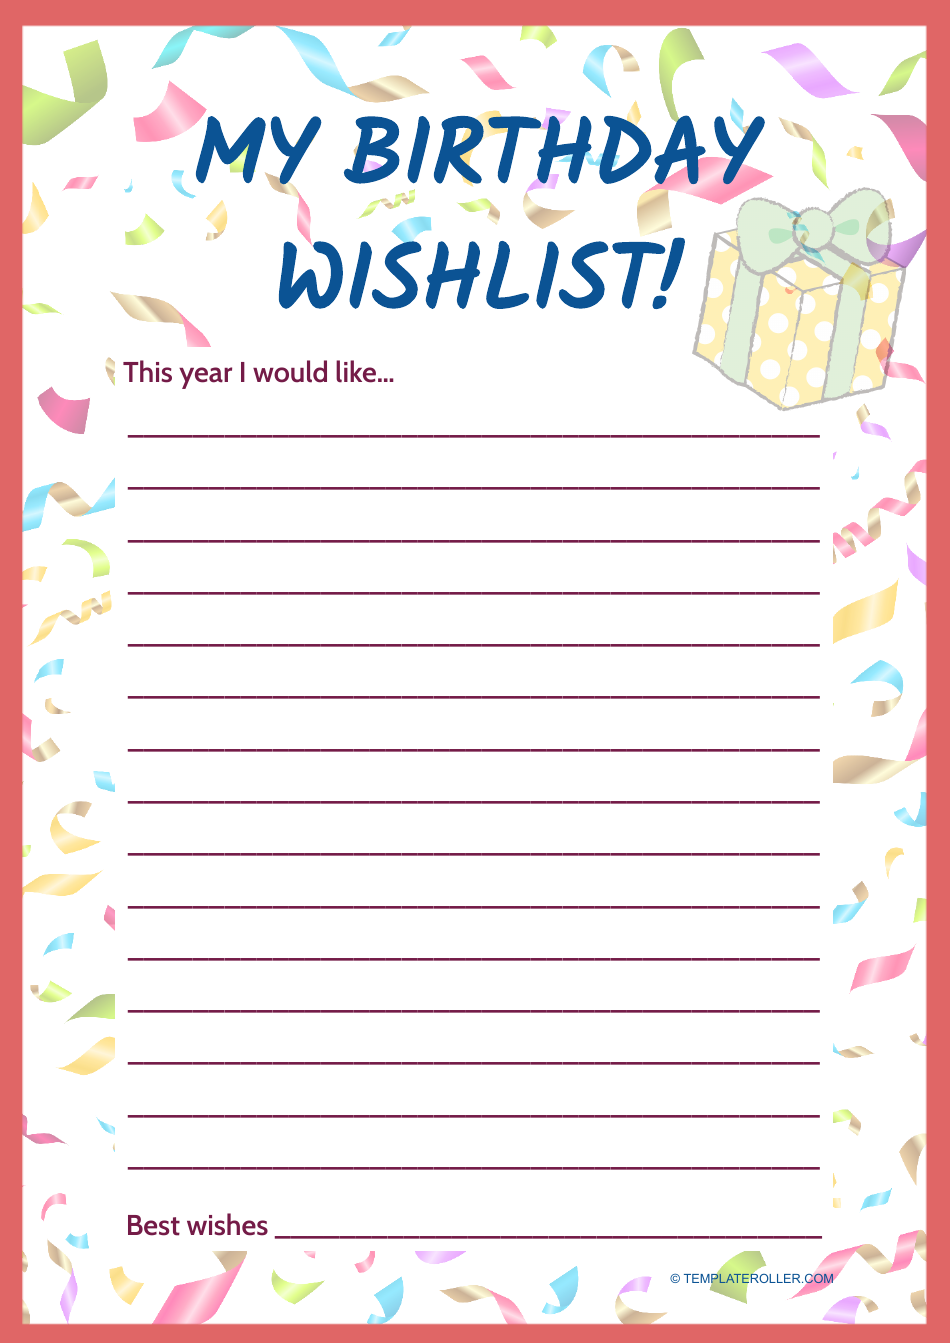 Birthday Wish List Template - Party, Page 1